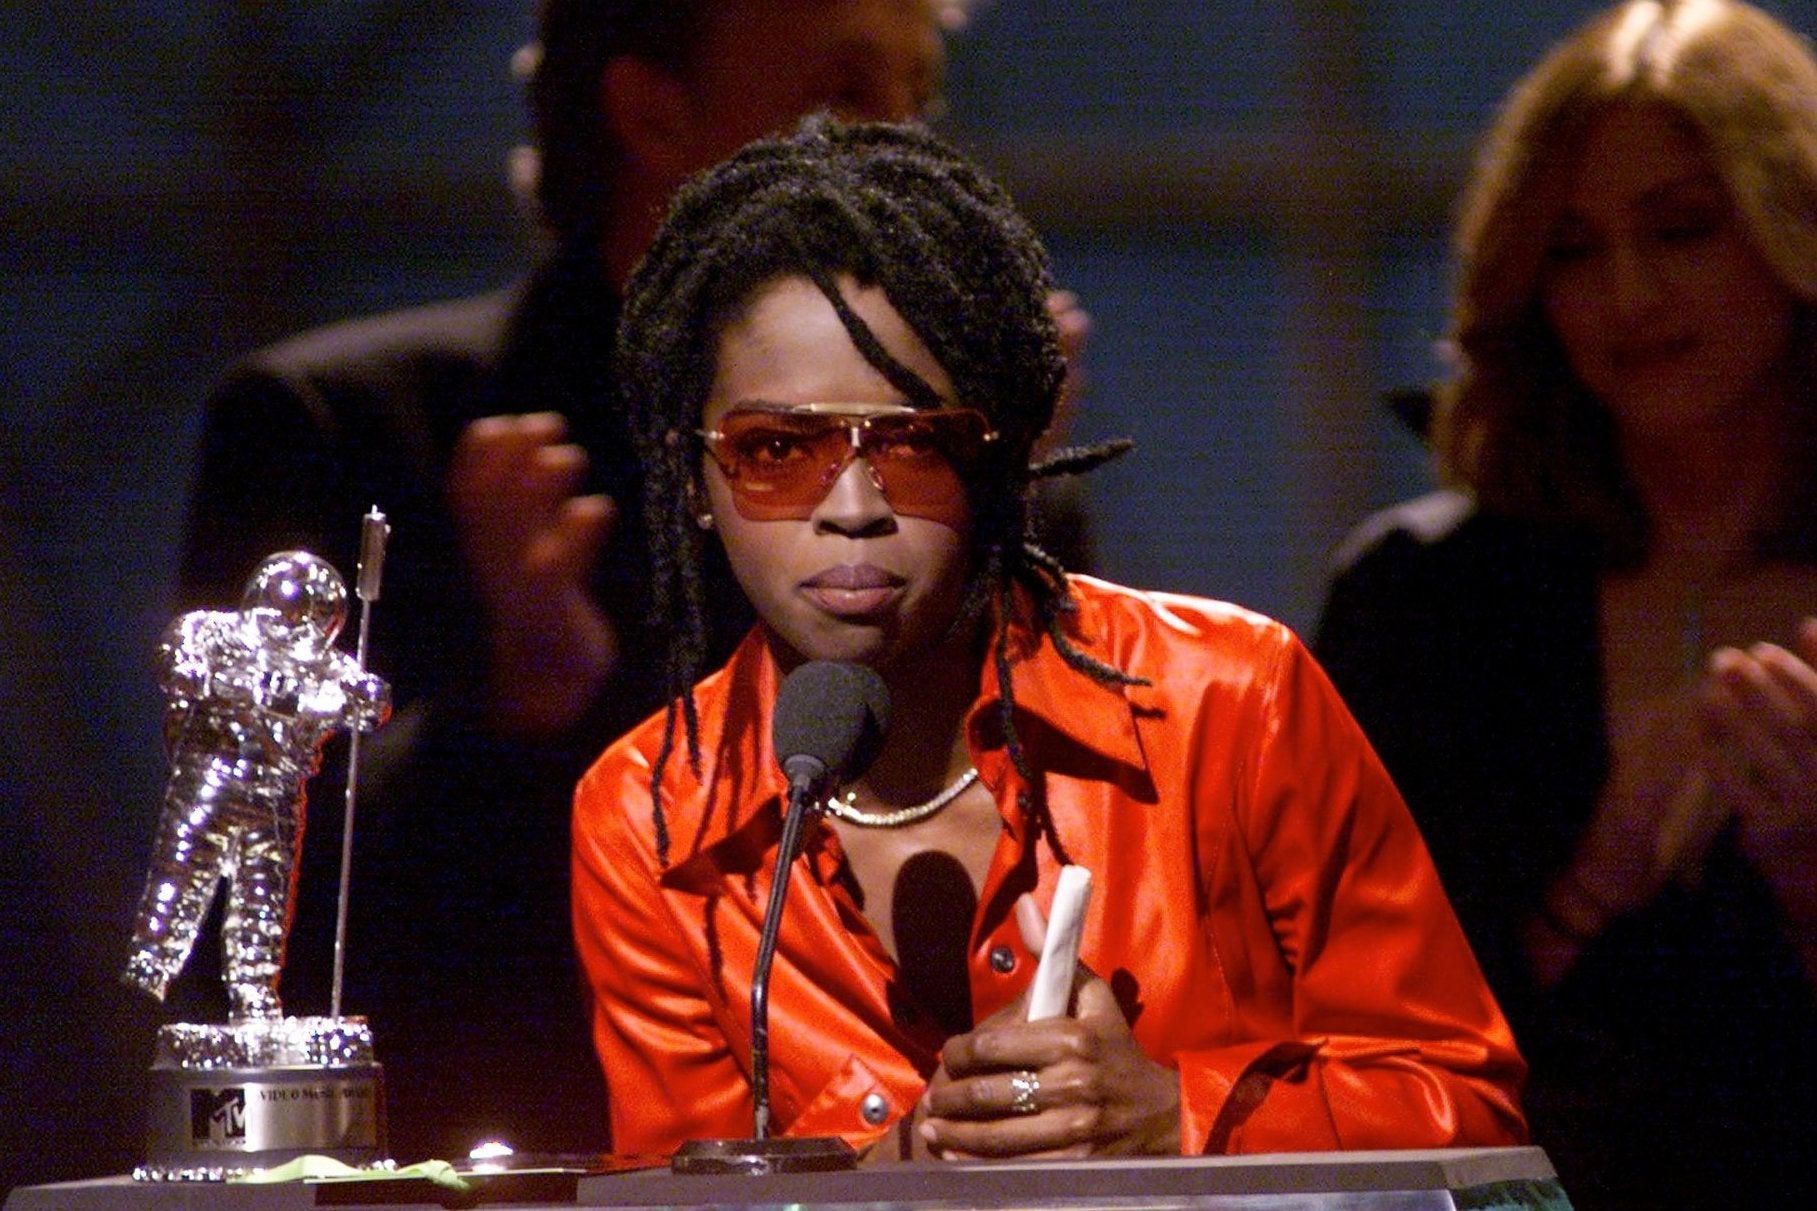 Lauryn Hill accepts an award at the 1999 MTV Video Music Awards